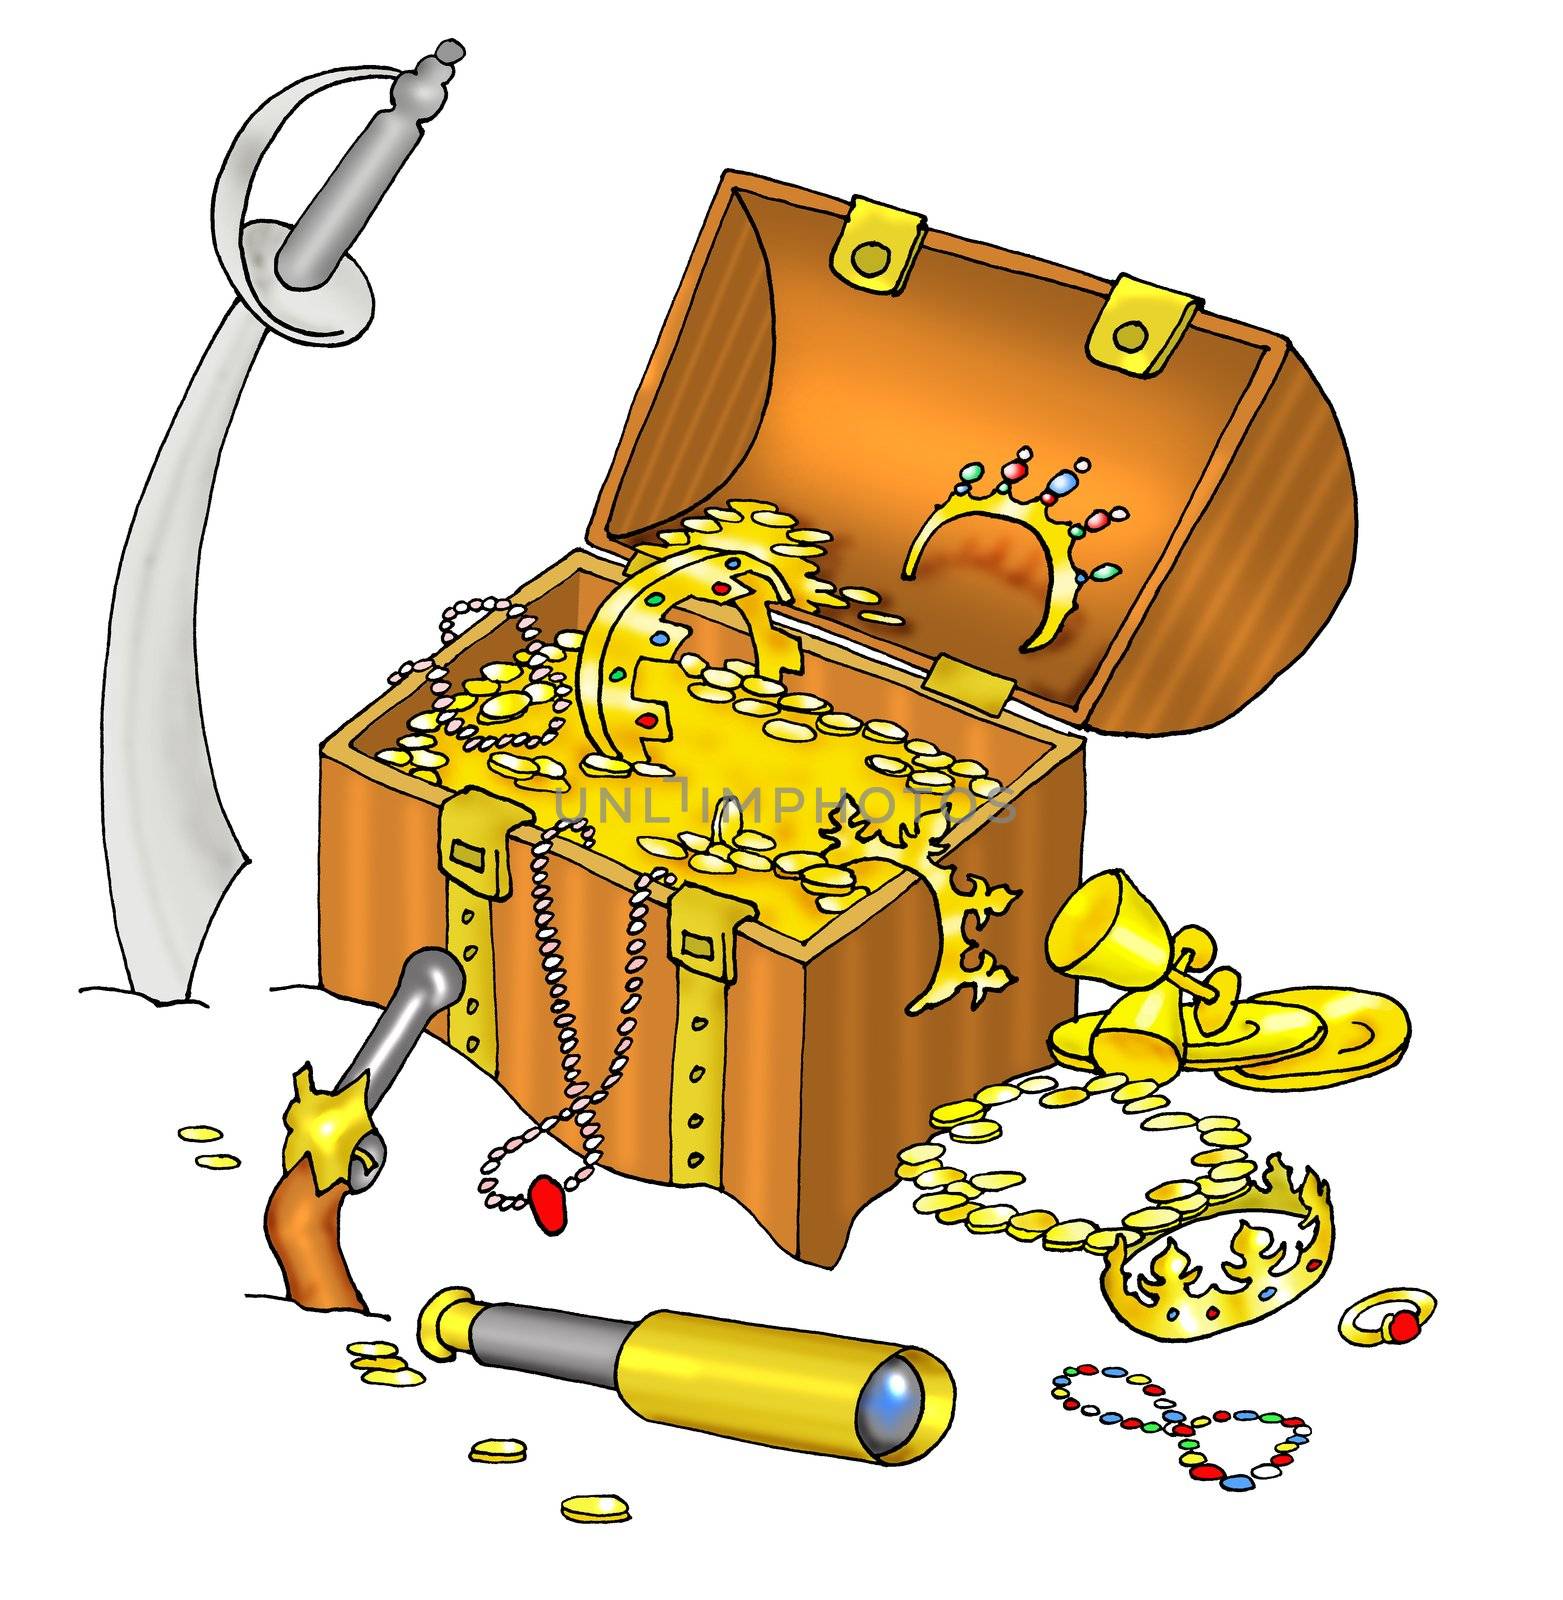 Pirate's treasure chest illustration with gold coins, cutlass isolated on a white background